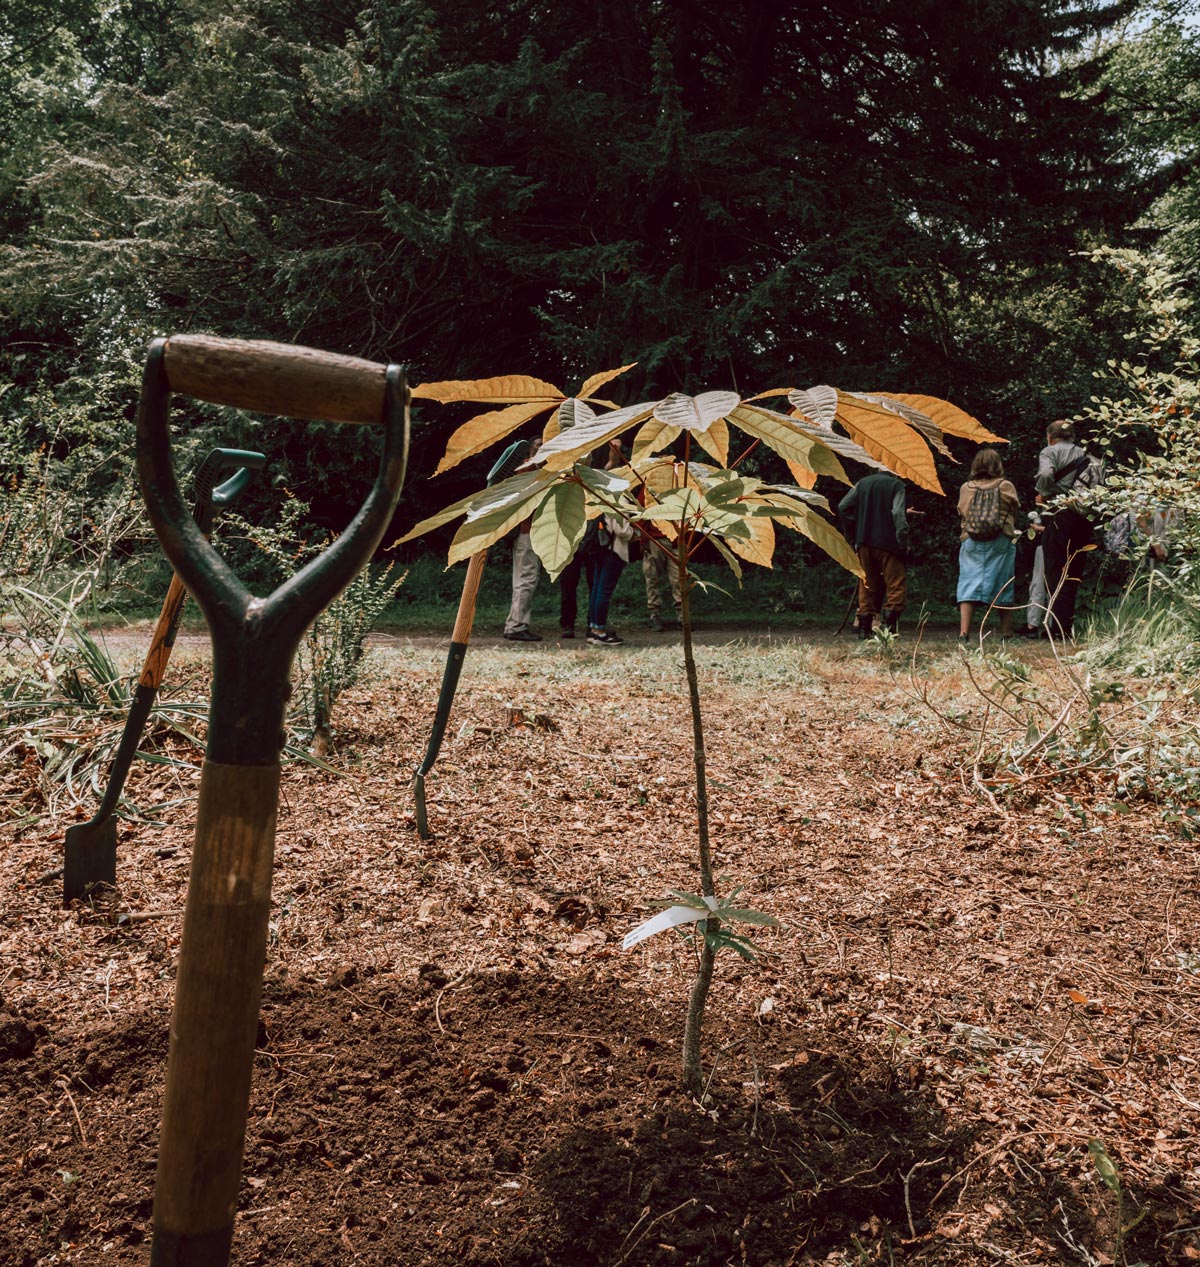 Shovels standing next to a newly planted tree while people are walking away in a distance.